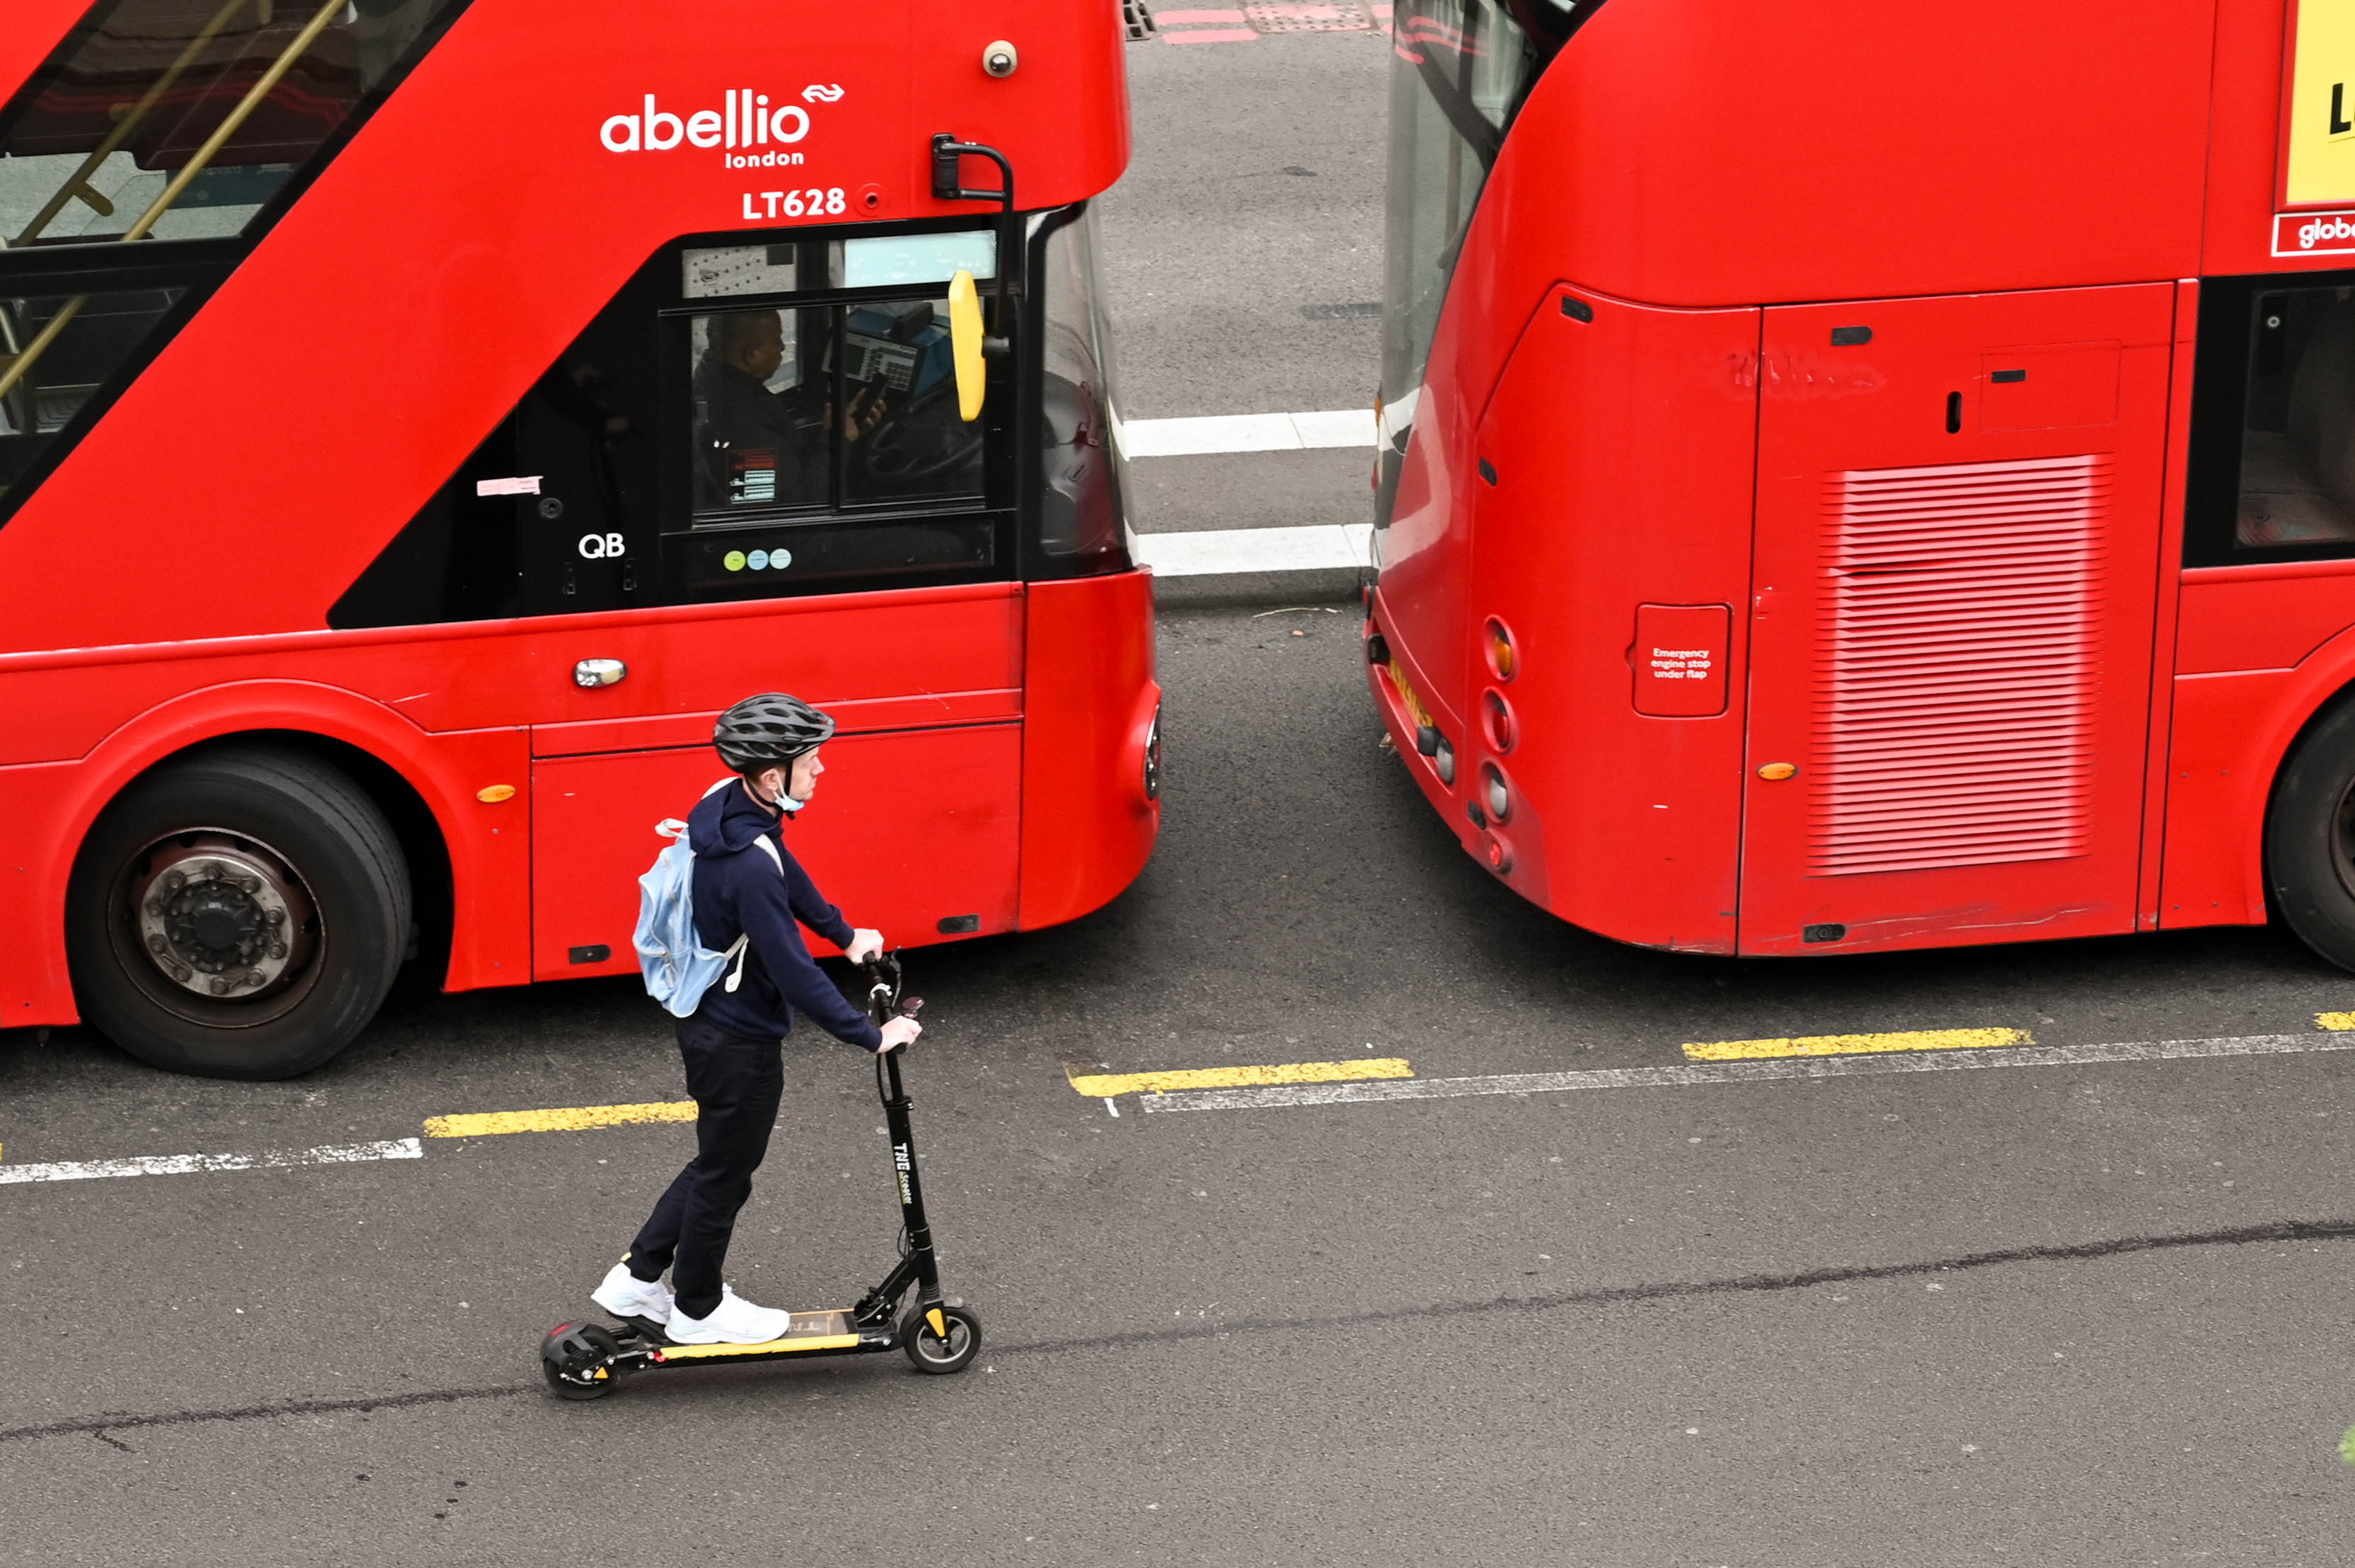 porter landsby melodisk Will the UK Government Change Laws on E-scooters in the Next Few Months -  Or Will We Have to Wait? » Electric Scooter Guide